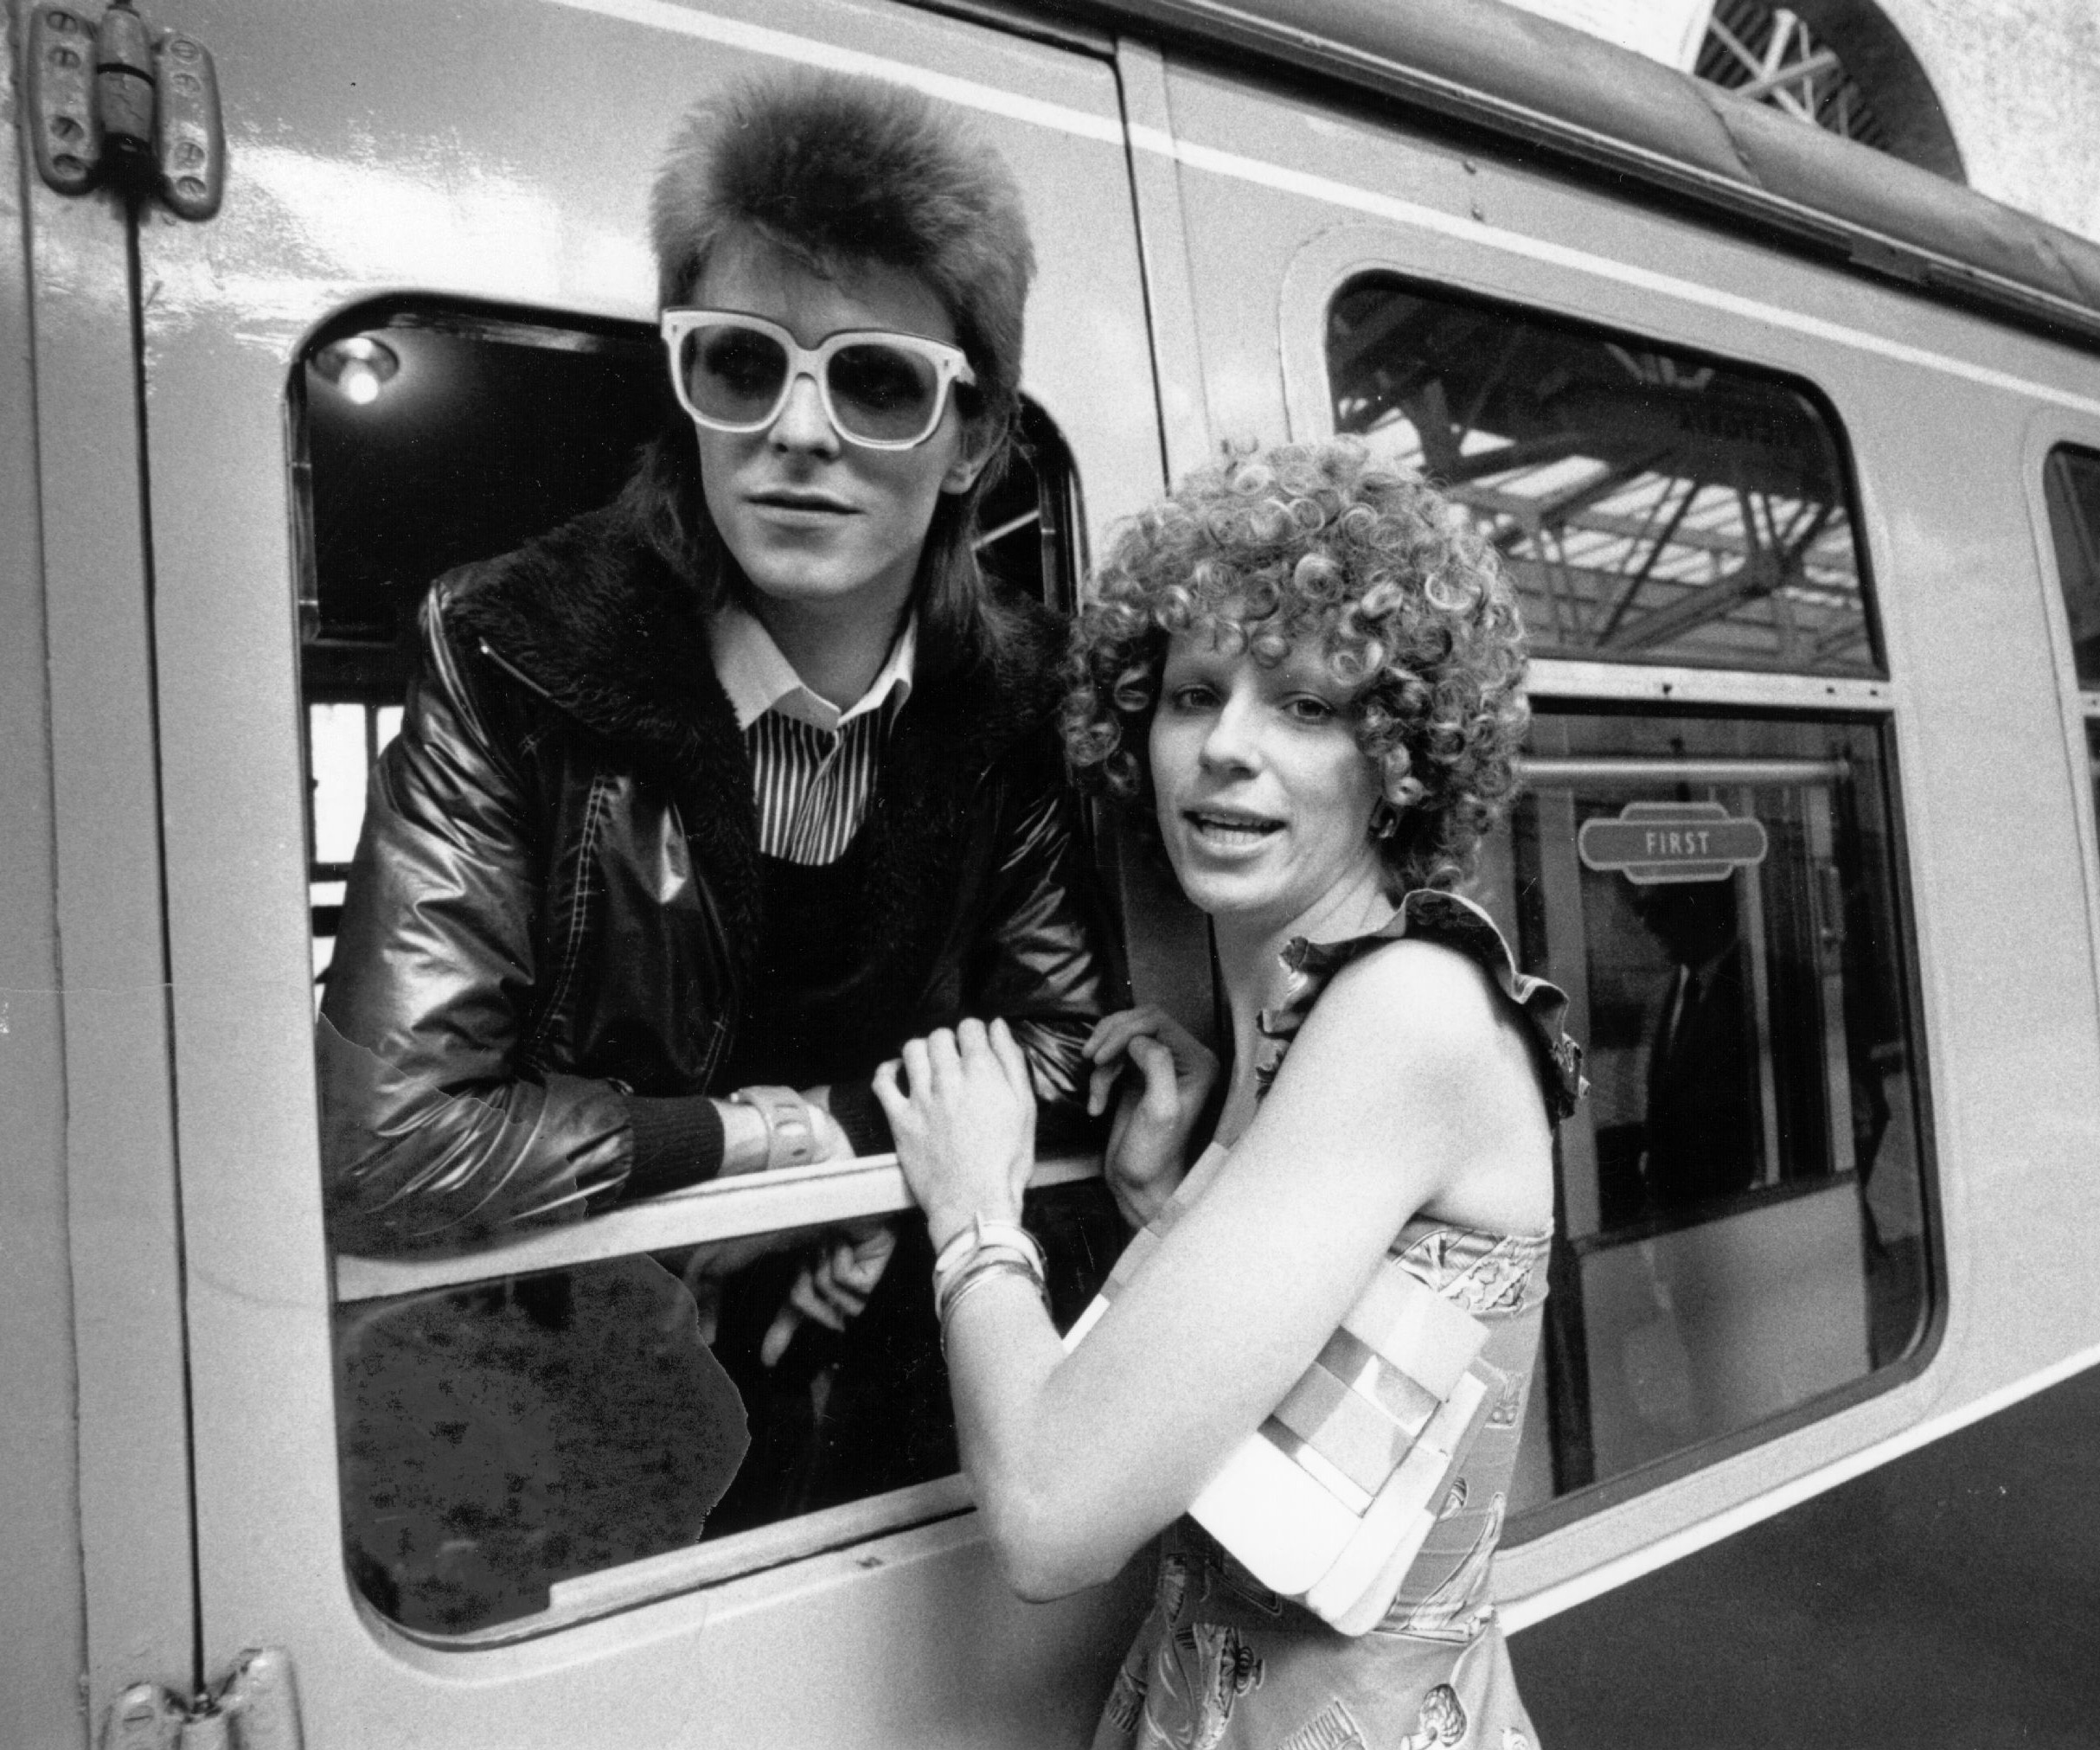 David and Angie Bowie